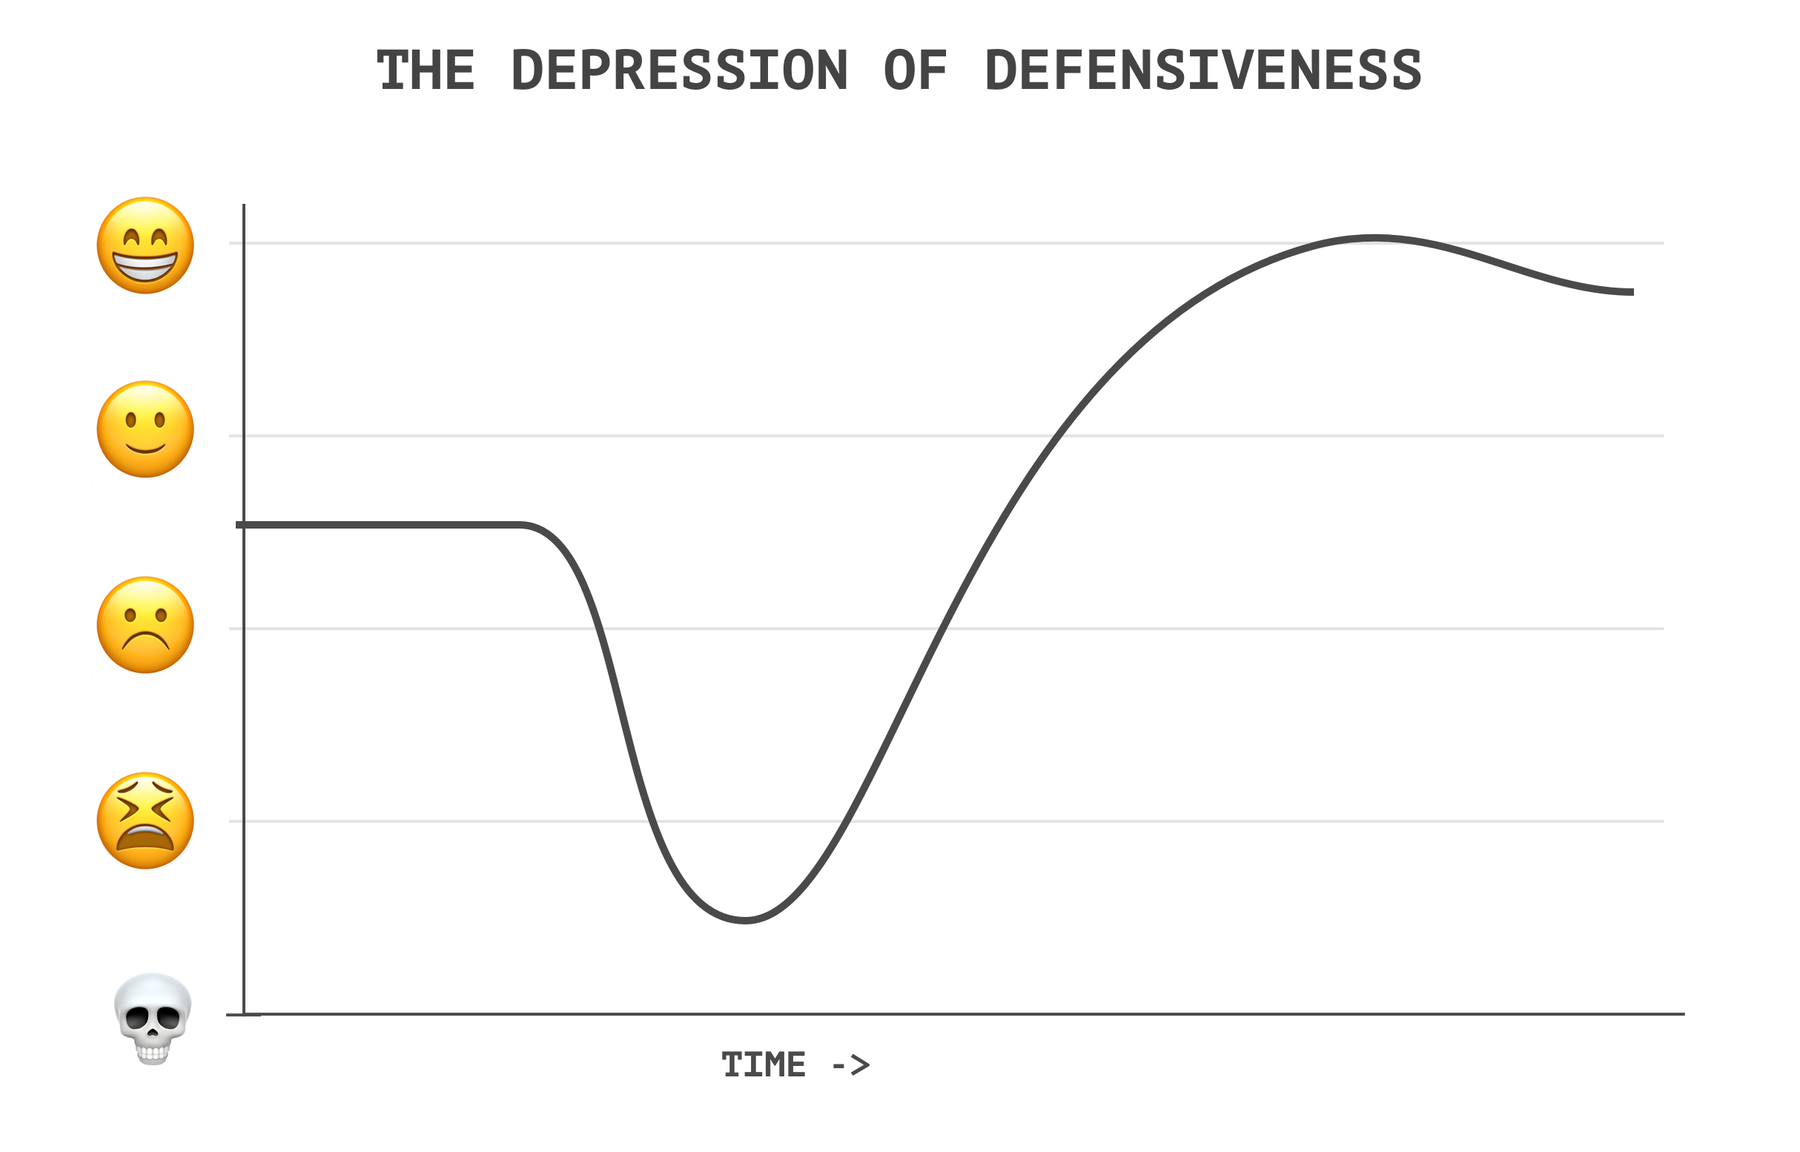 Chart labelled THE DEPRESSION OF DEFENSIVENESS showing a drop in happiness followed by a slow increase over time